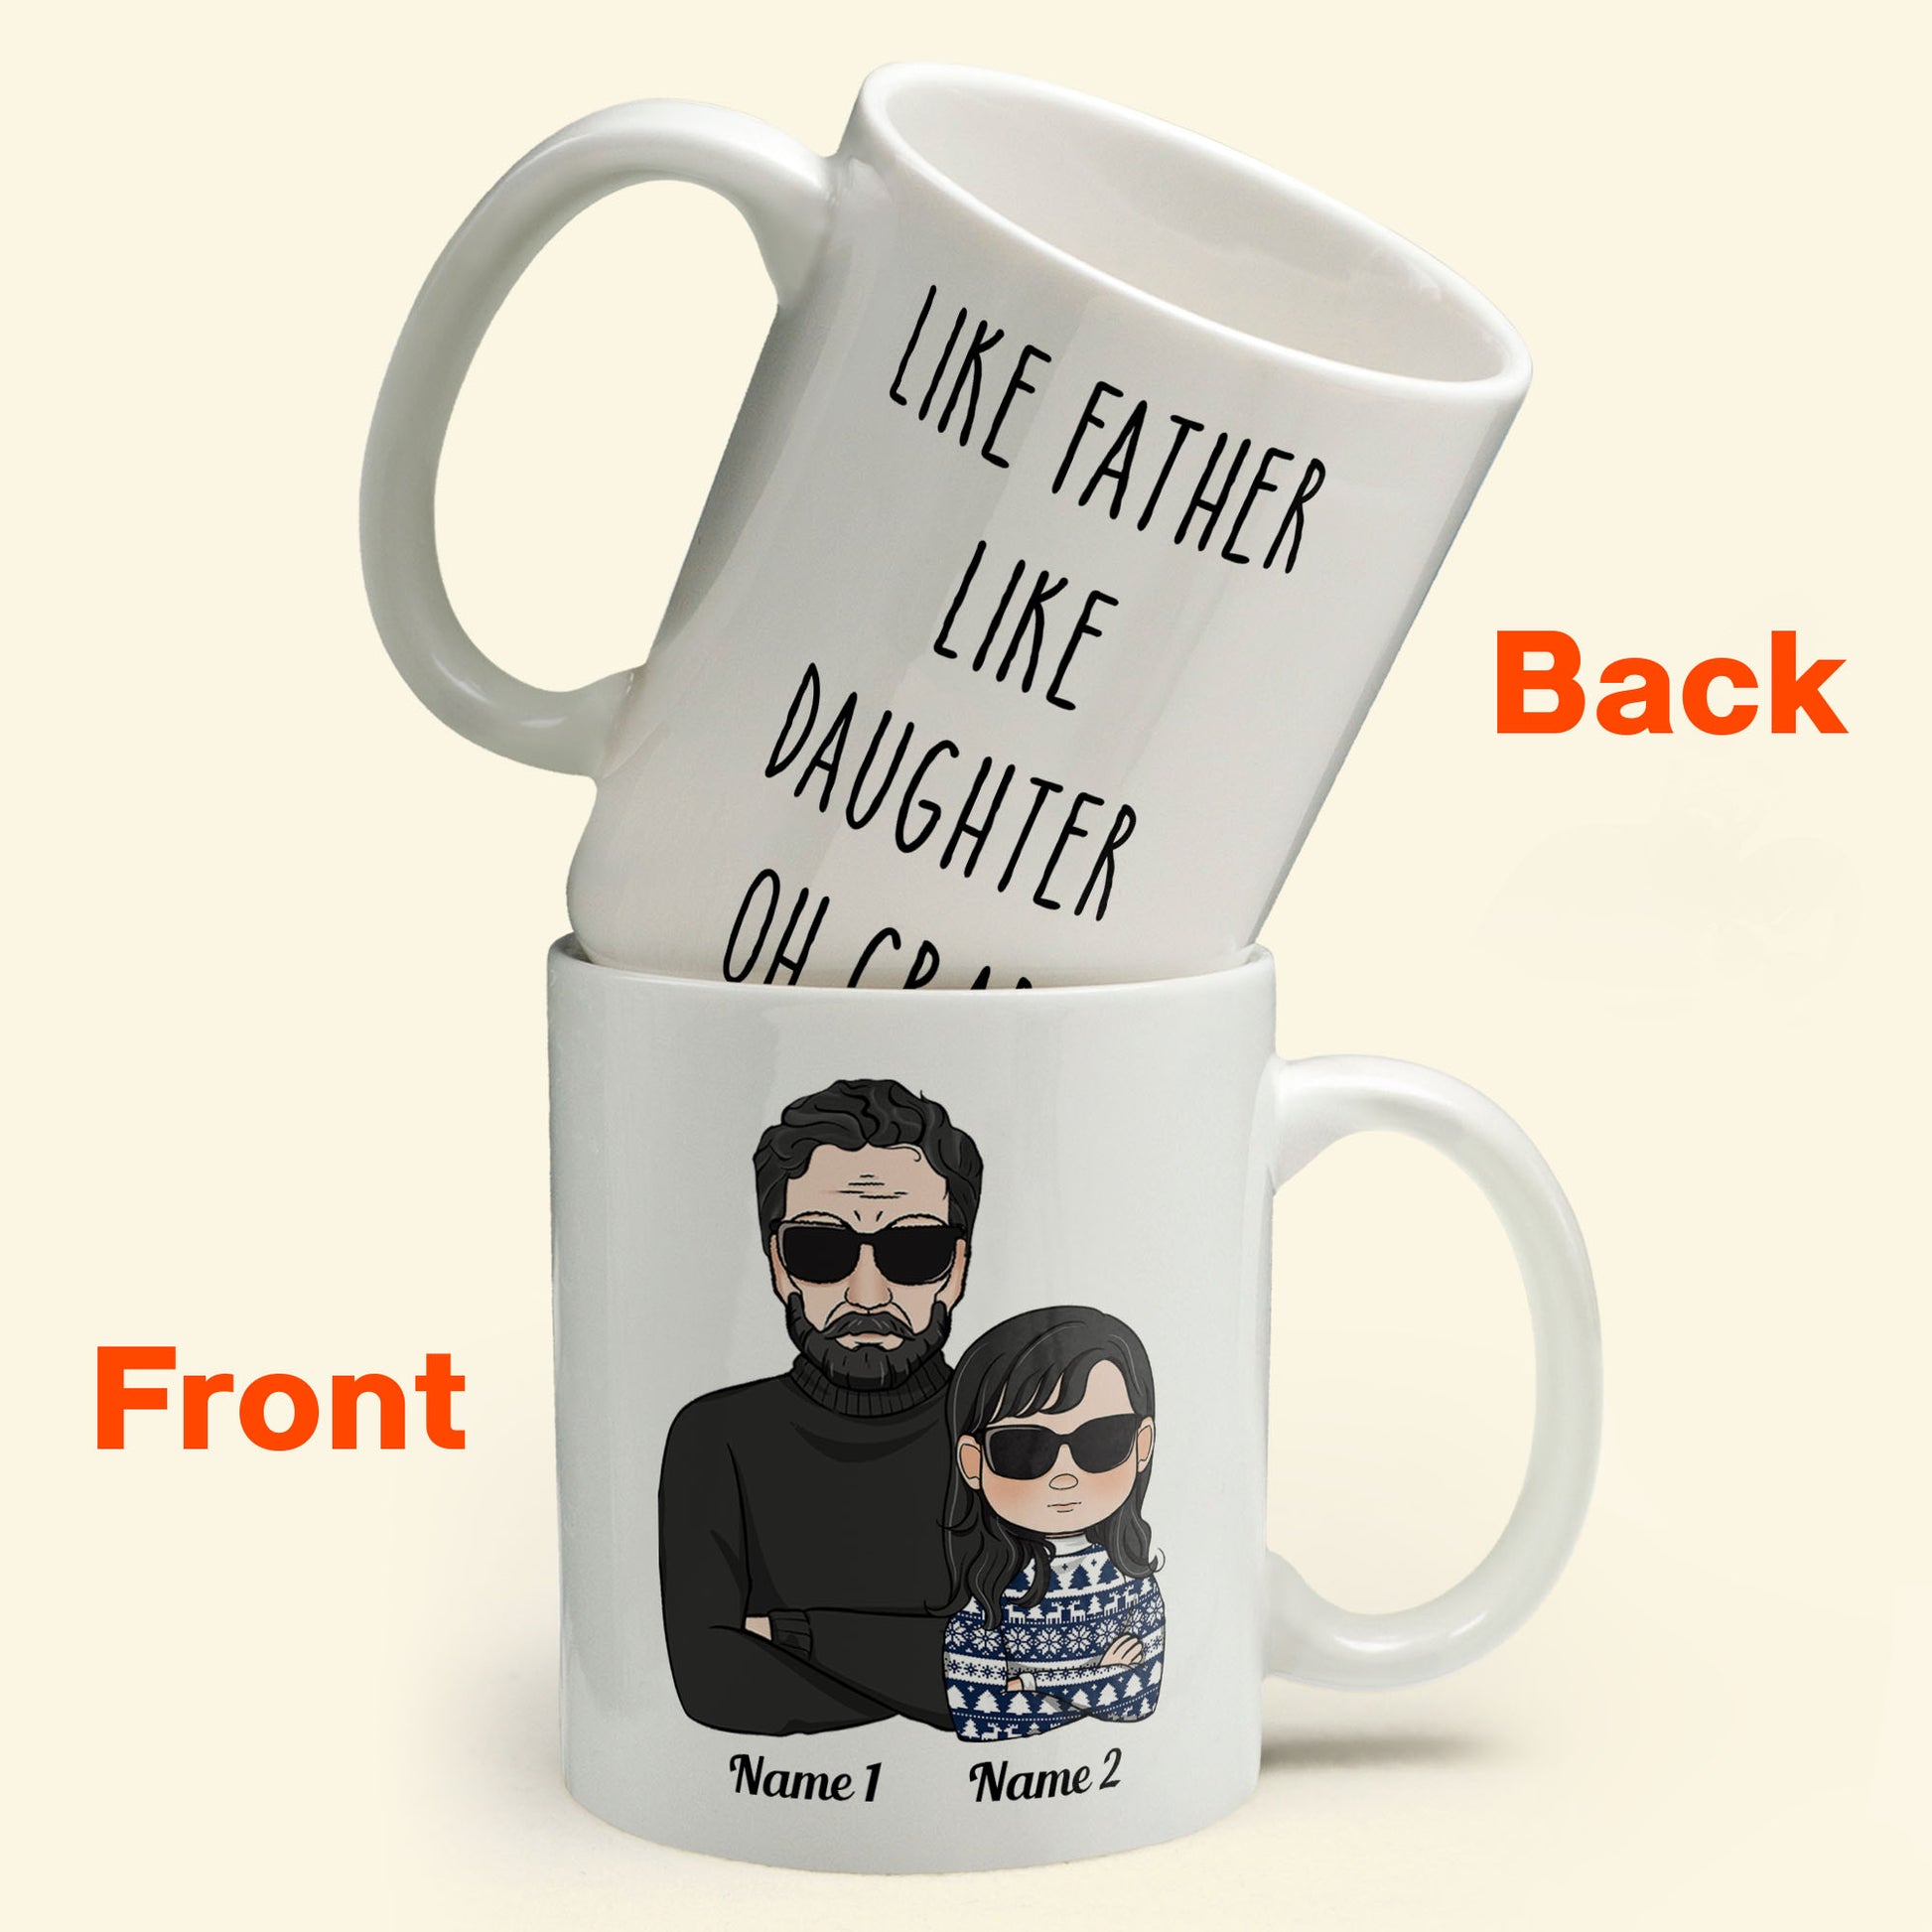 https://macorner.co/cdn/shop/products/Like-Father-Like-Daughter-Oh-Crap-Personalized-Mug-Christmas-Gift-For-Fathers_-Mothers_-Grandpas_-Grandmas_-Sons-_-Daughters_1.jpg?v=1636187338&width=1946